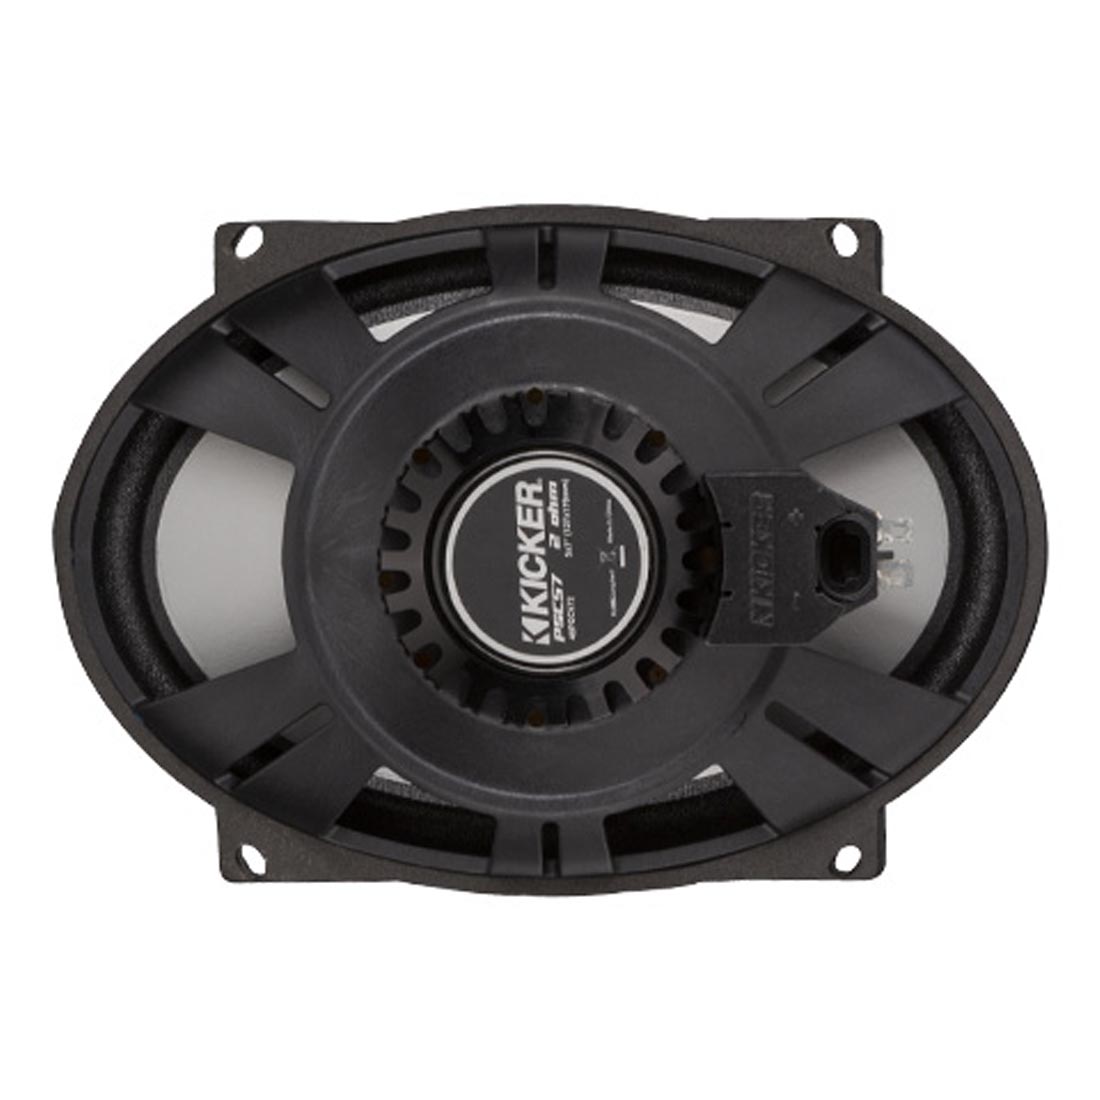 Kicker 48PSC574 5"x7" 2-Way 4-Ohm Coaxial Motorcycle Speakers for Harley Davidson